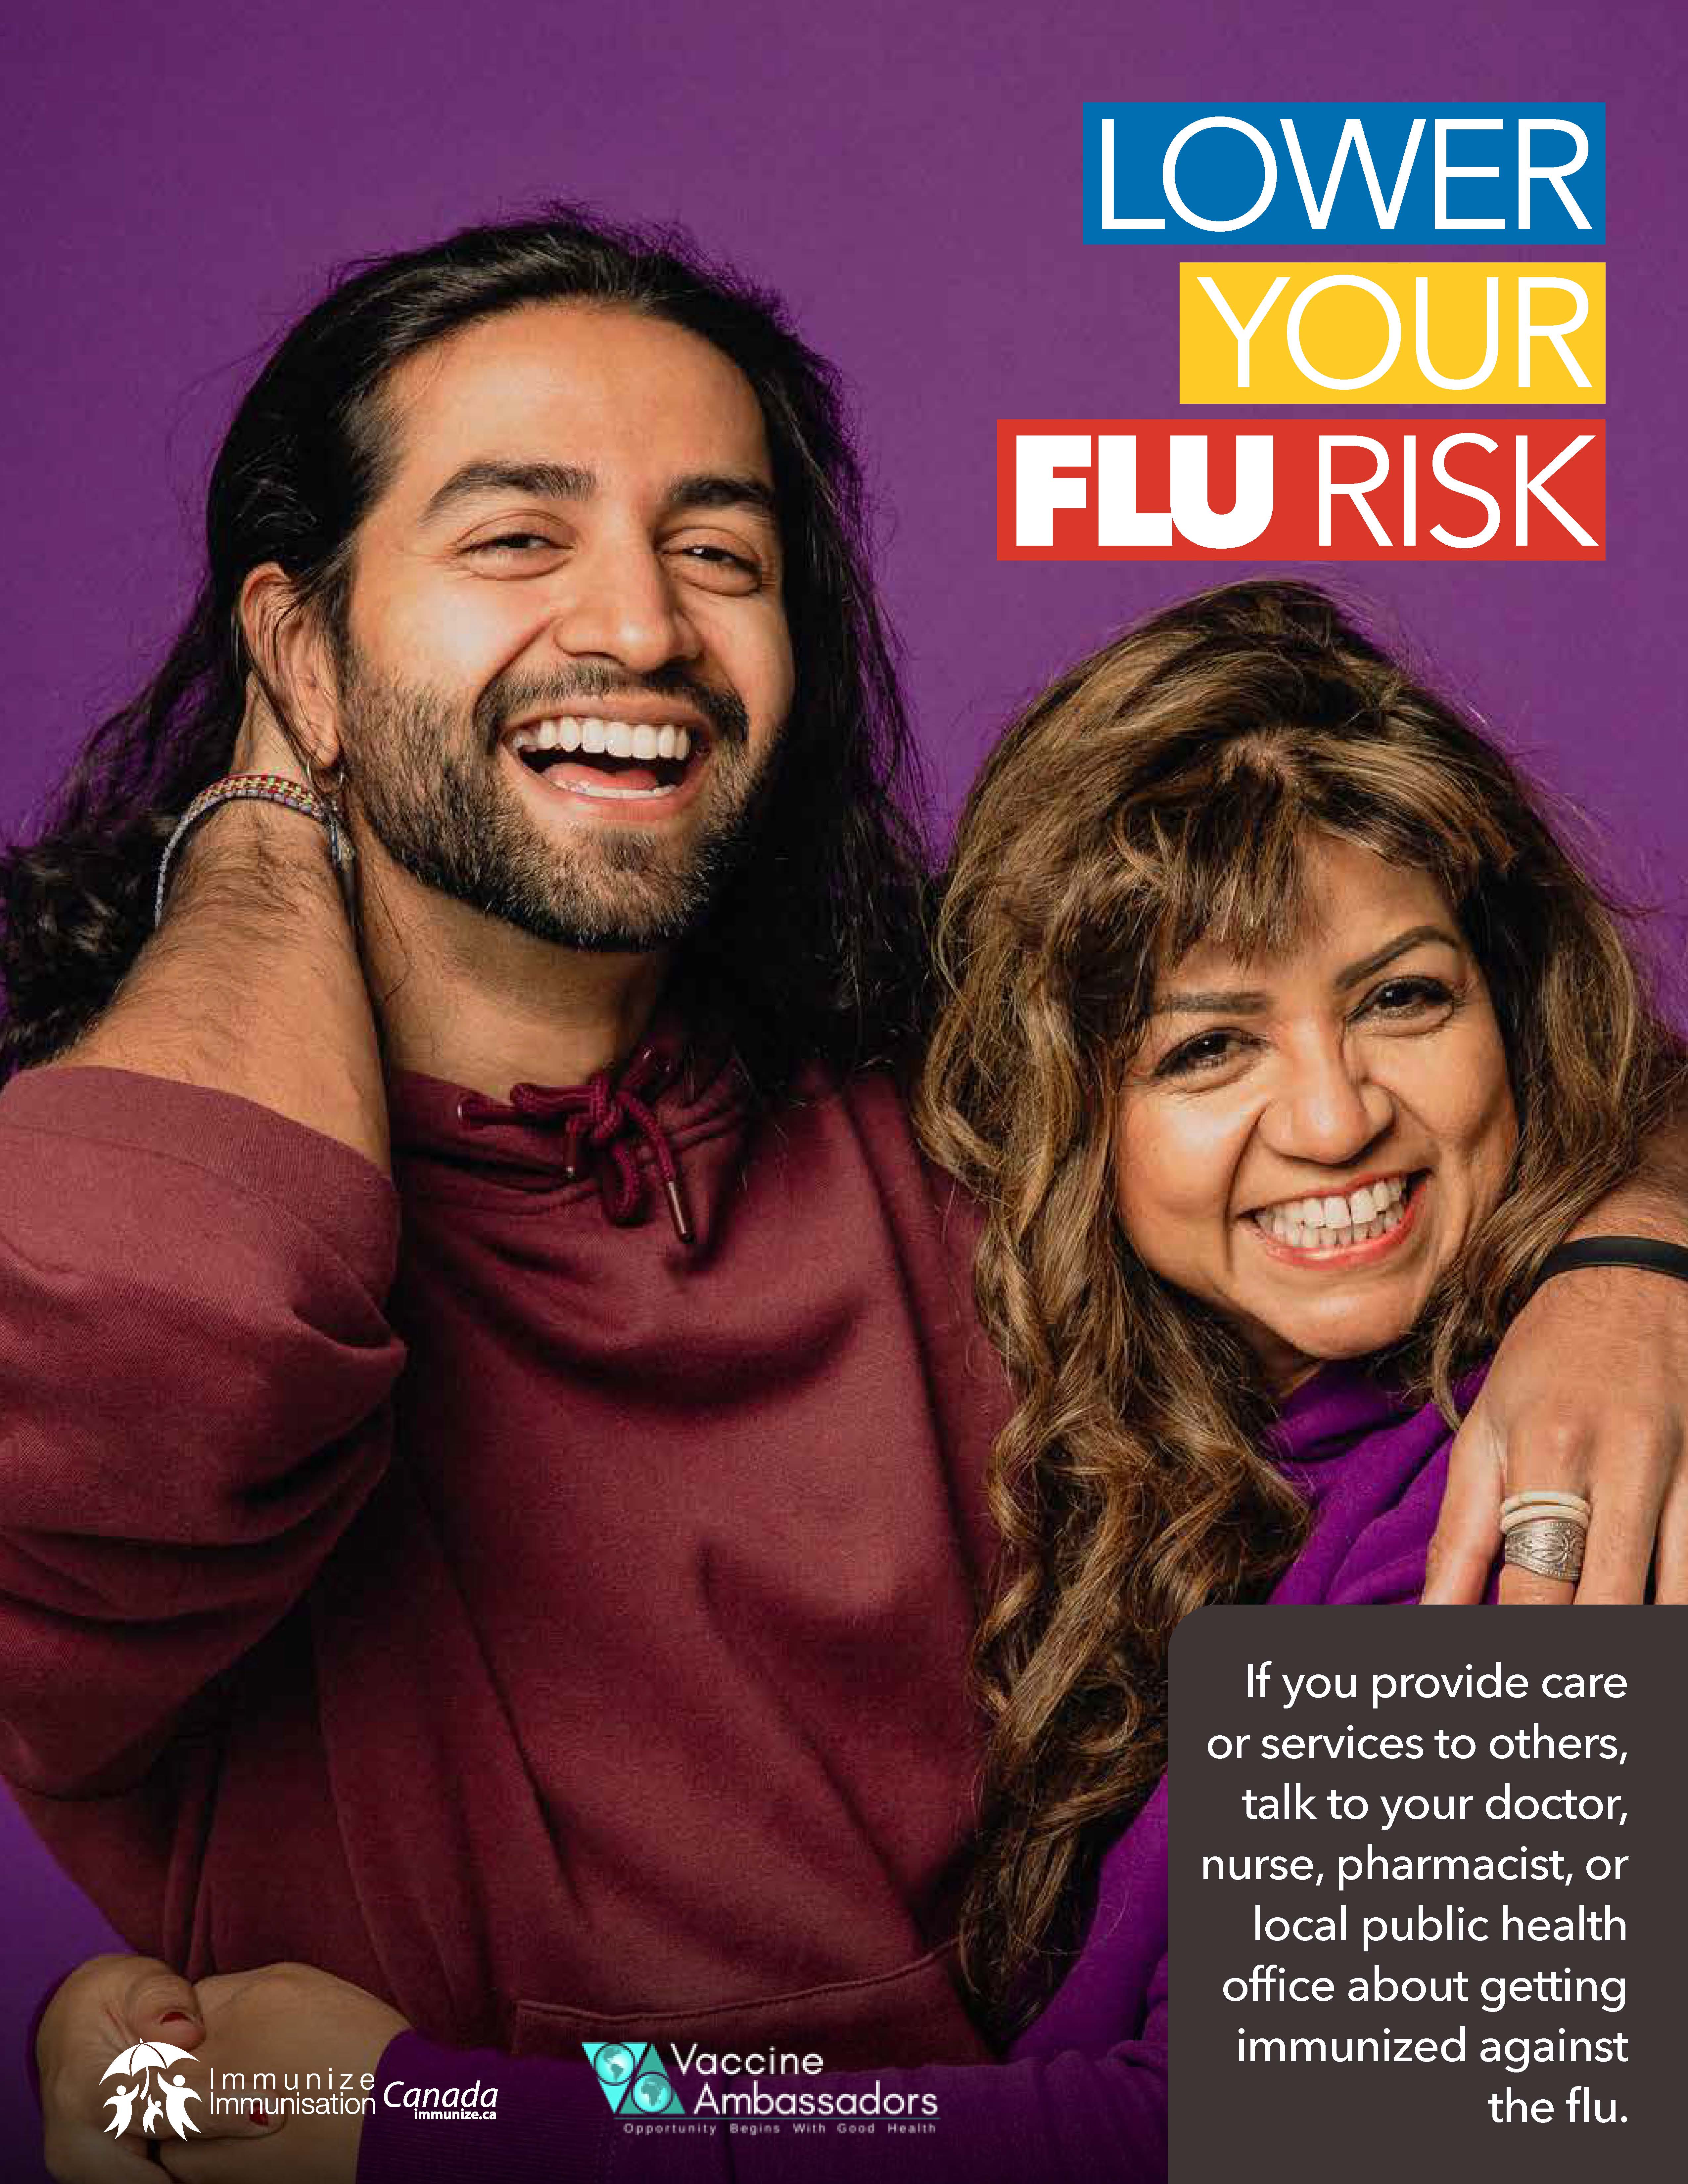 Lower your flu risk - if you provide care or services to others